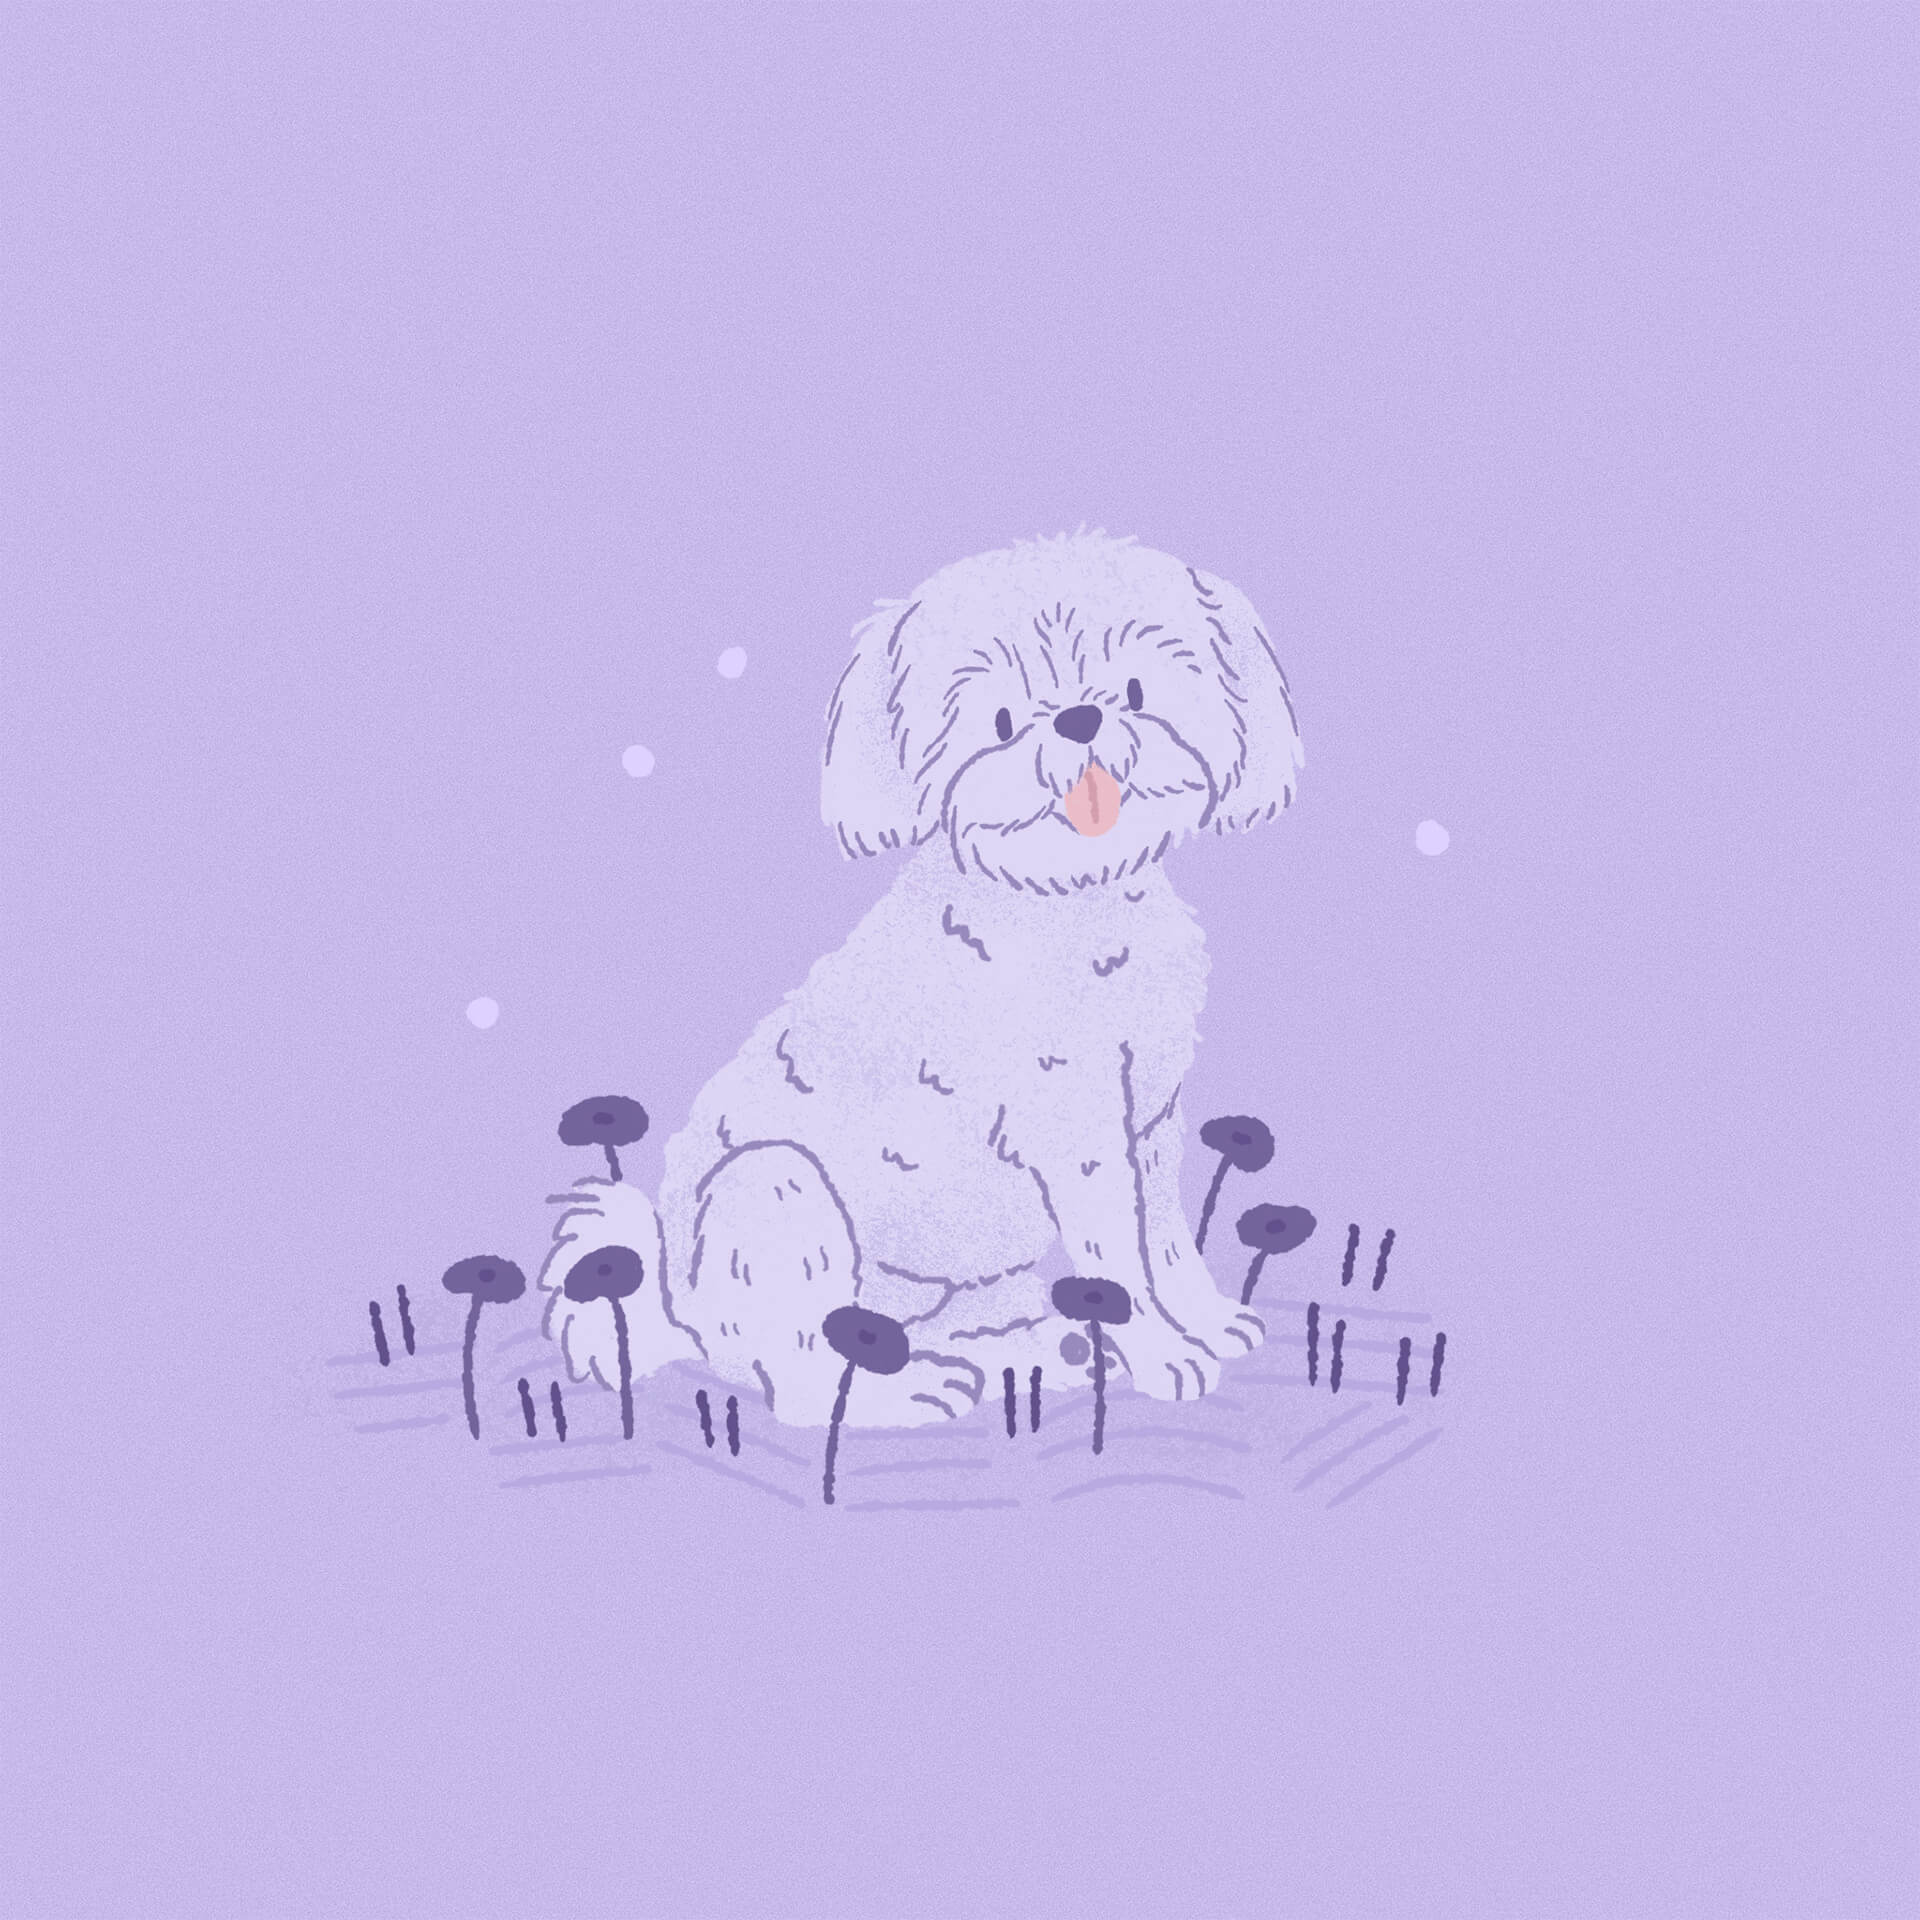 An illustration of a purple shih tzu sitting in some flowers